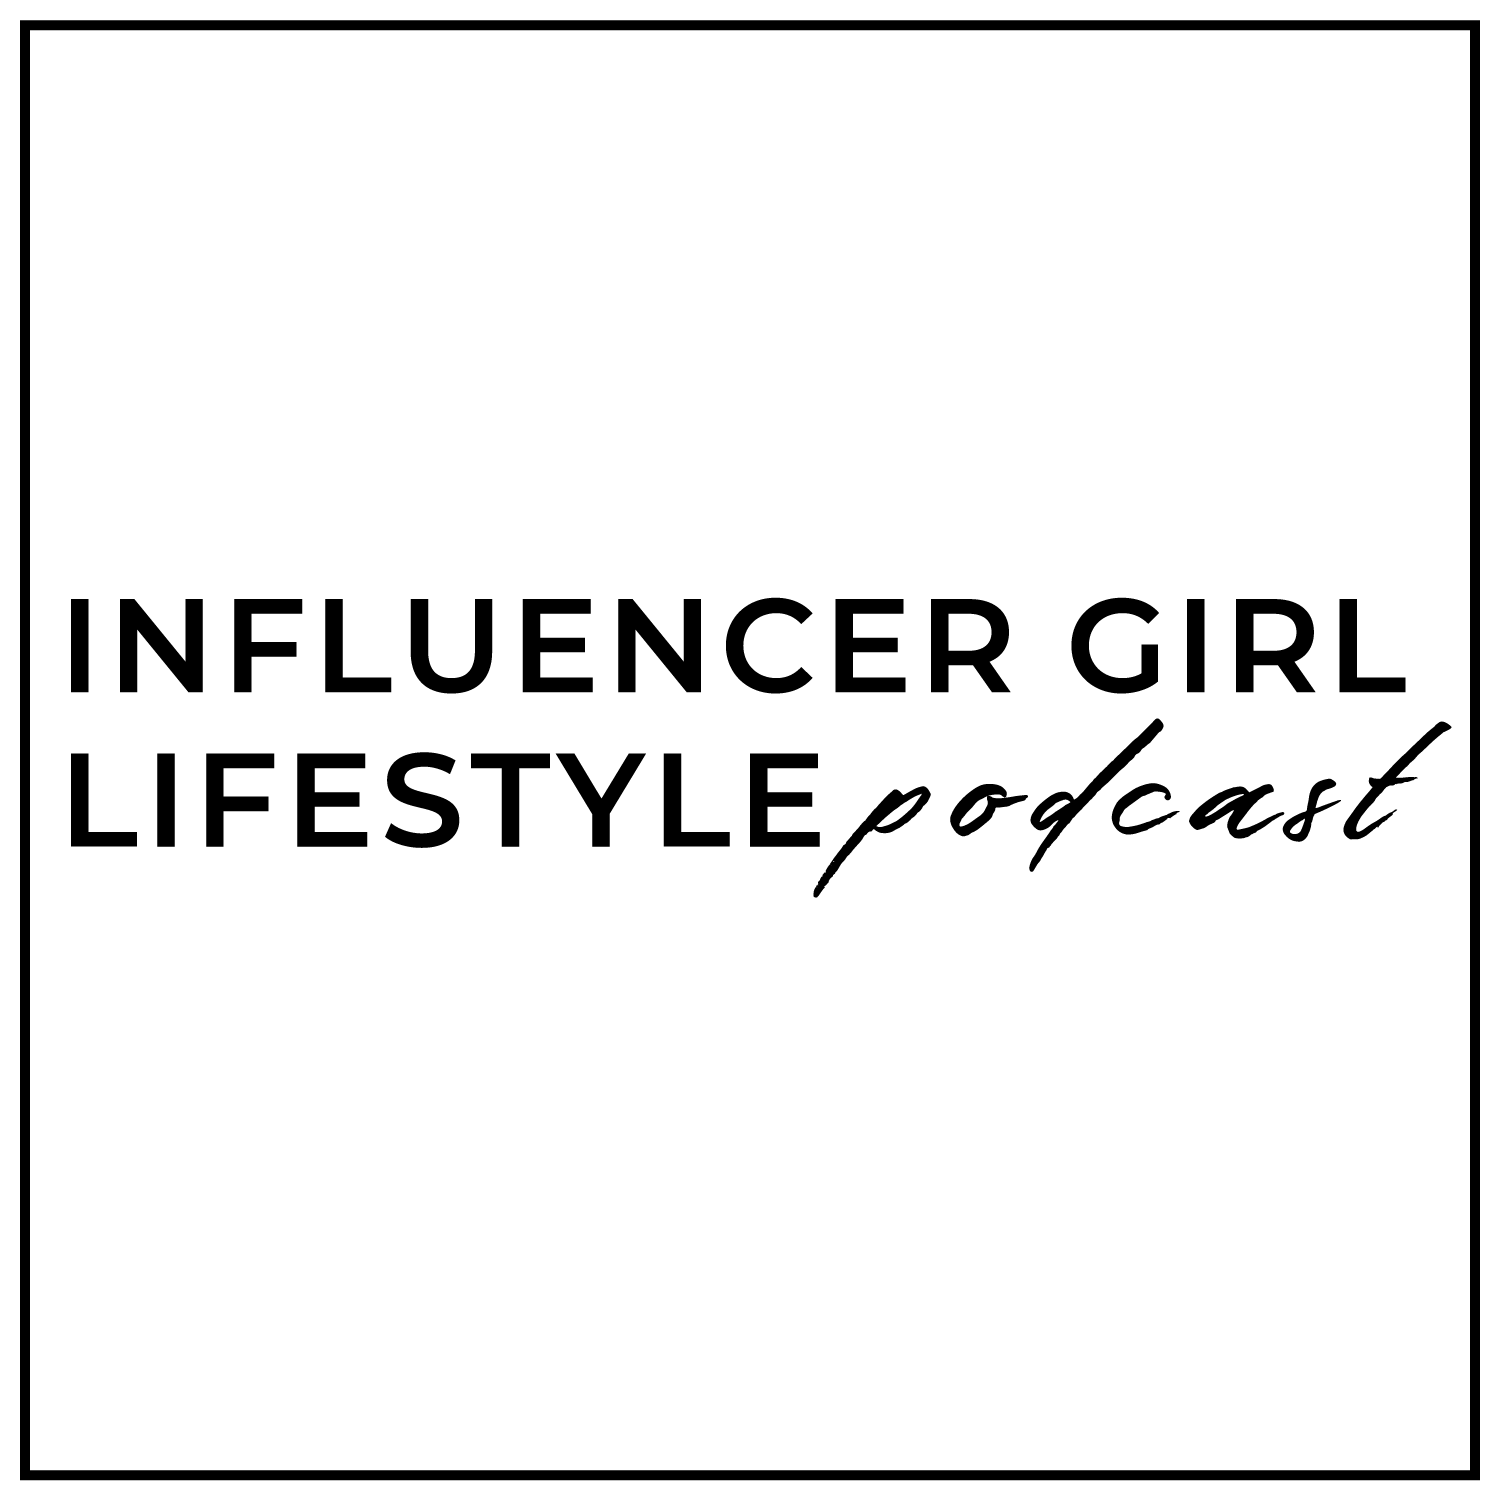 Influencer Girl Lifestyle Podcast 2.png